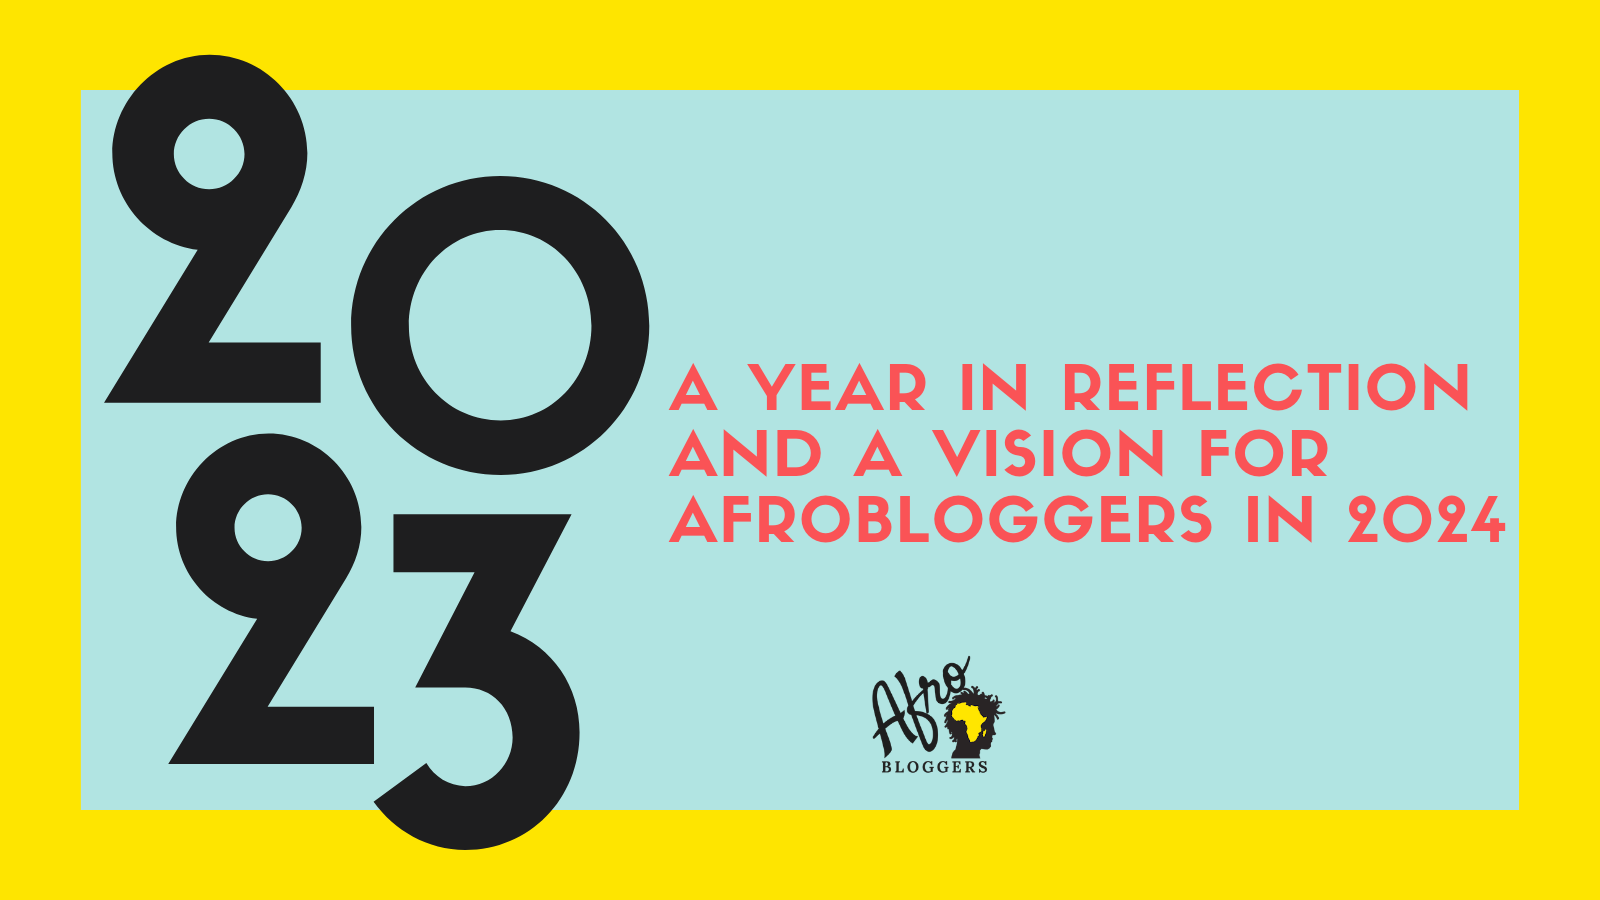 2023 A Year in Reflection and a Vision for Afrobloggers in 2024